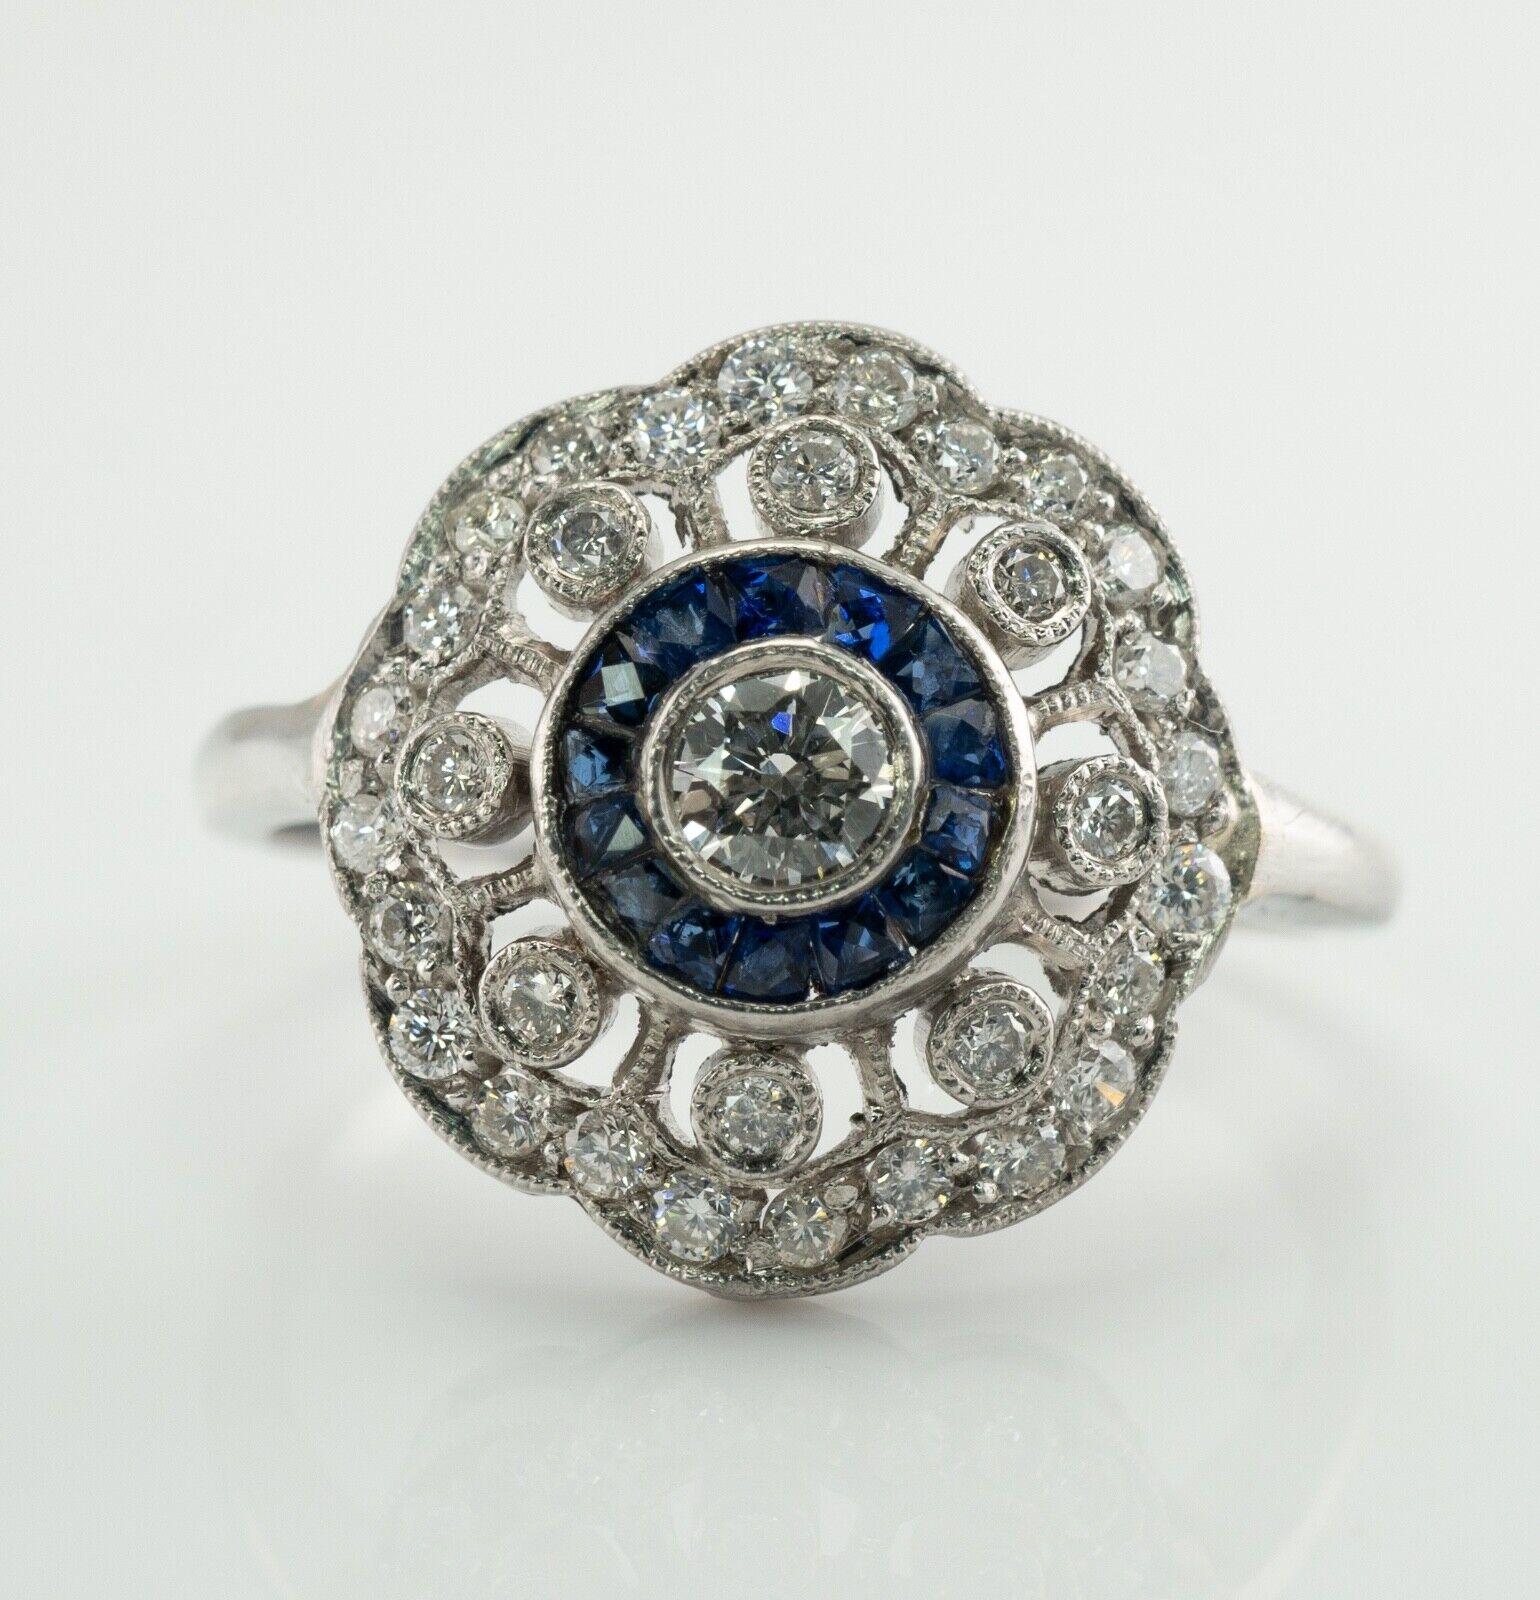 This pretty vintage ring is crafted in solid 14K White Gold (carefully tested and guaranteed).
The center round brilliant cut diamond is .20 carat.
8 surrounding diamonds total .24 carat.
And 24 small diamonds total .24 carat.
The total diamond